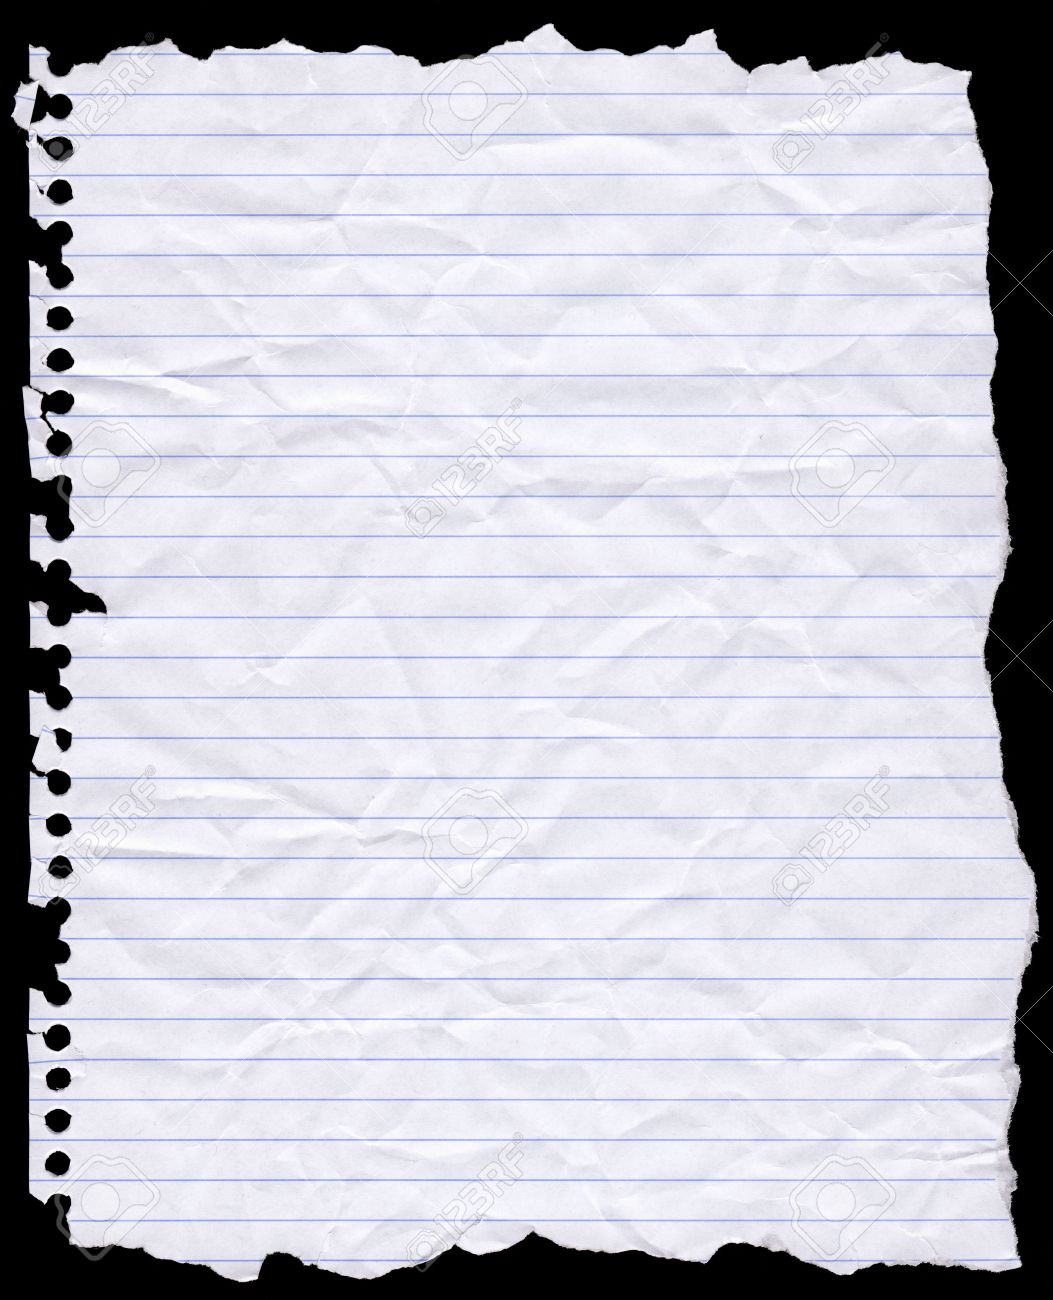 Old Notebook Paper Blank Meme Template